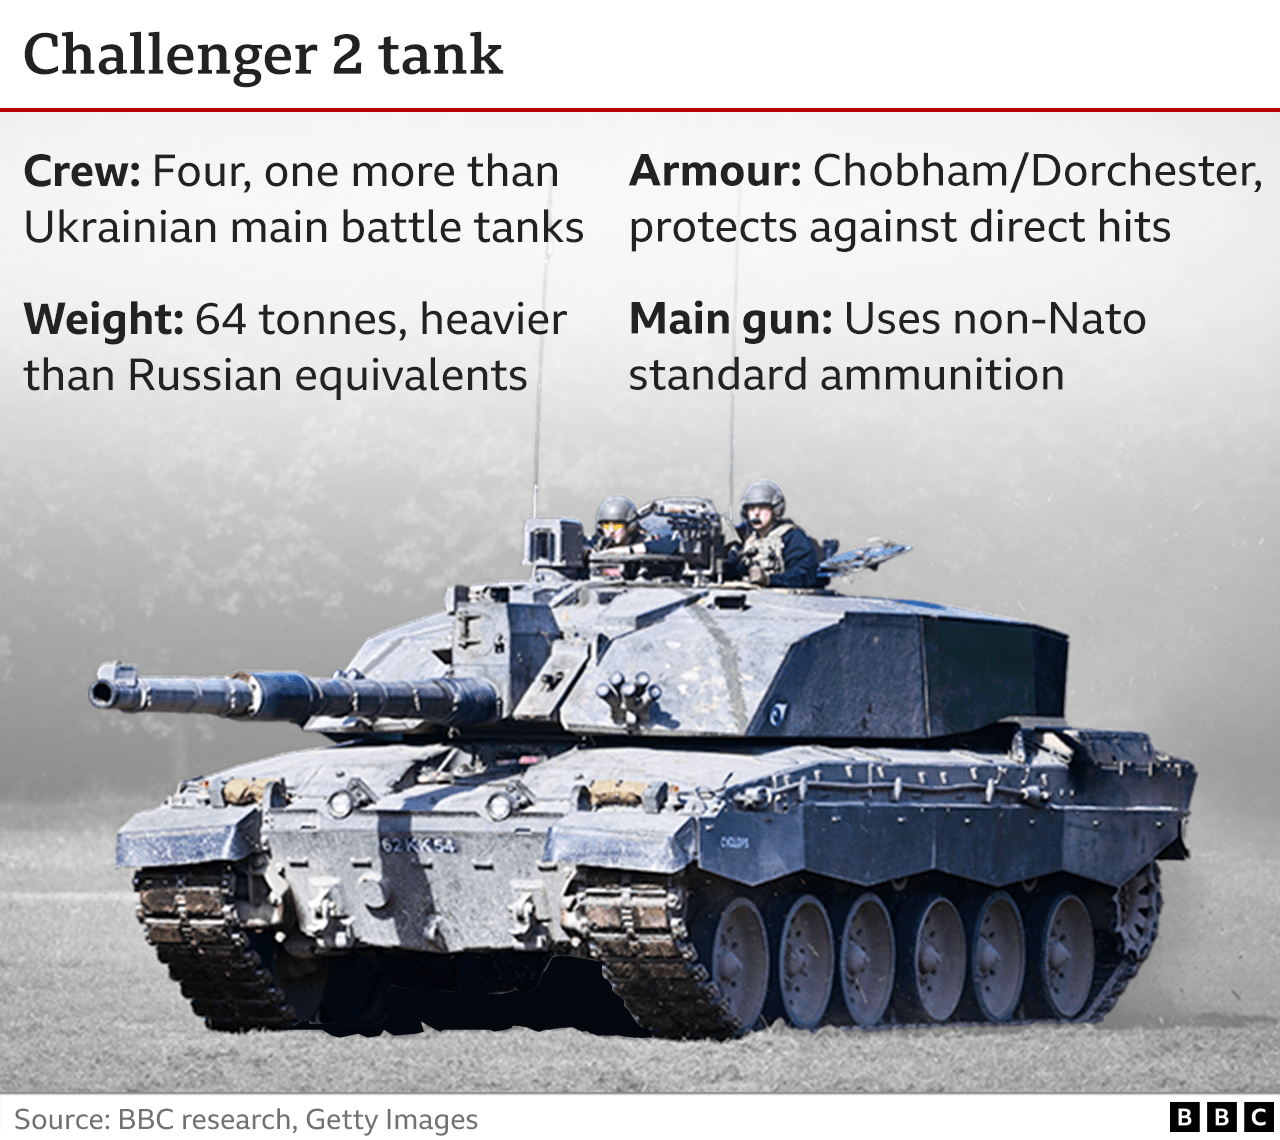 Infographic on the UK's Challenger 2 tank, explaining its technical characteristics